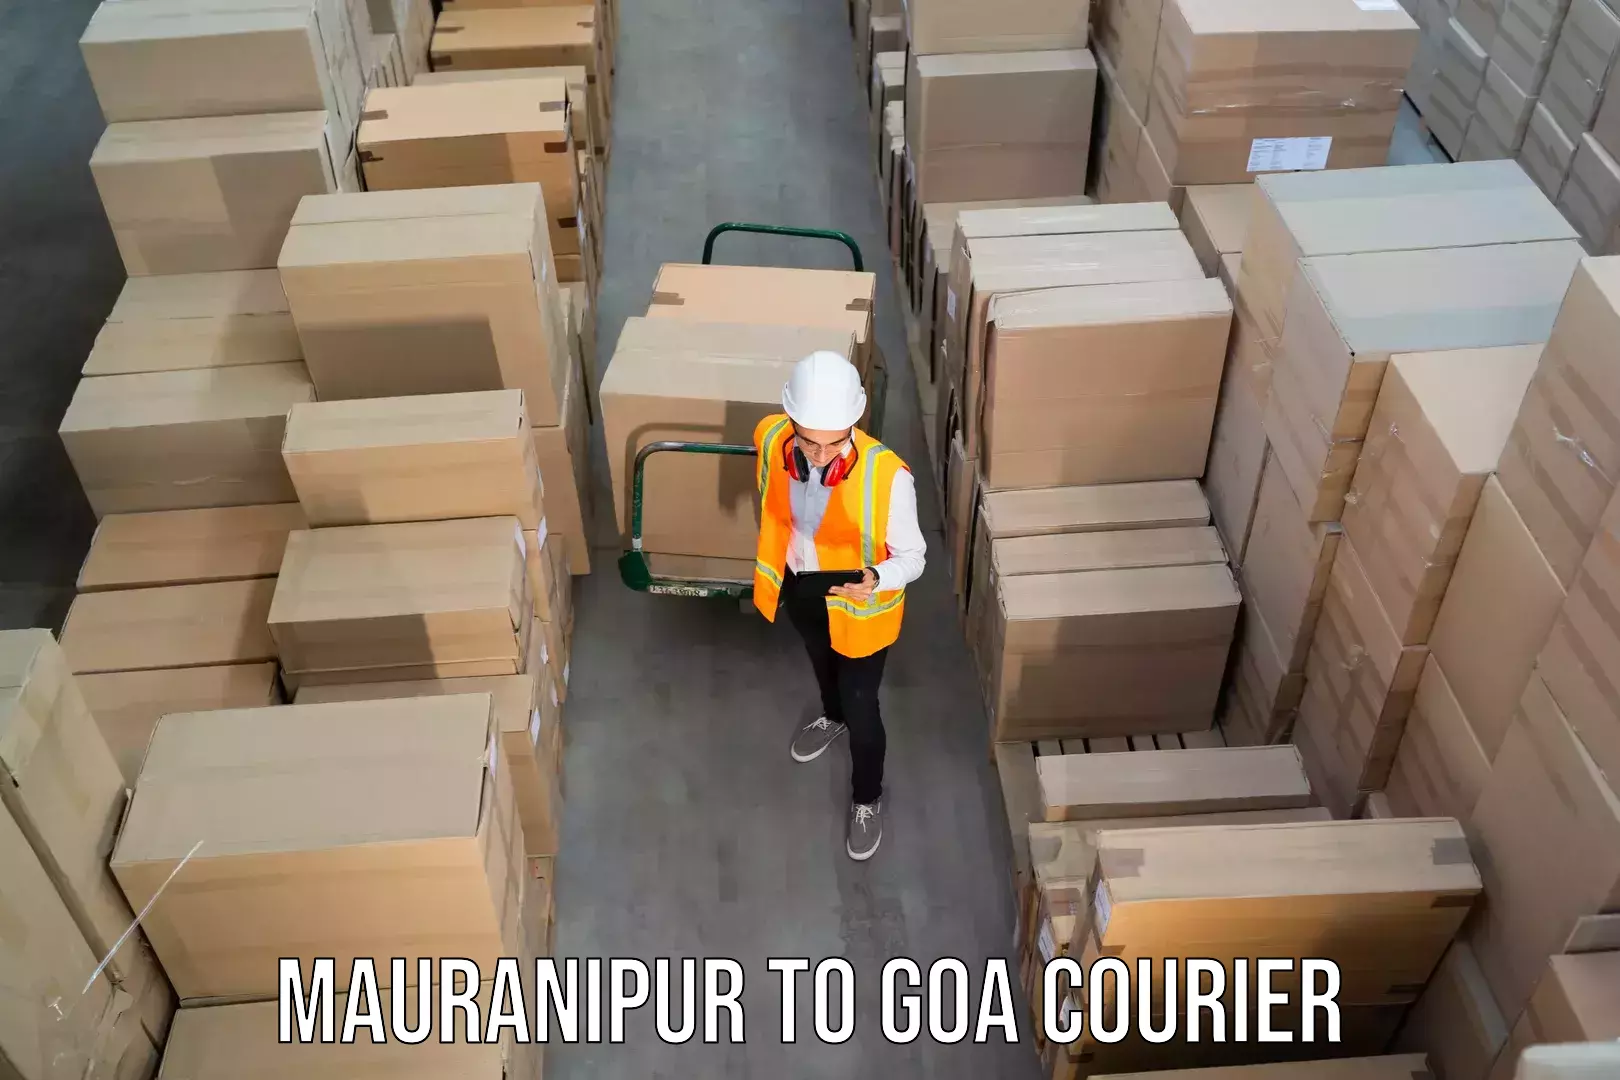 Nationwide courier service Mauranipur to Panaji